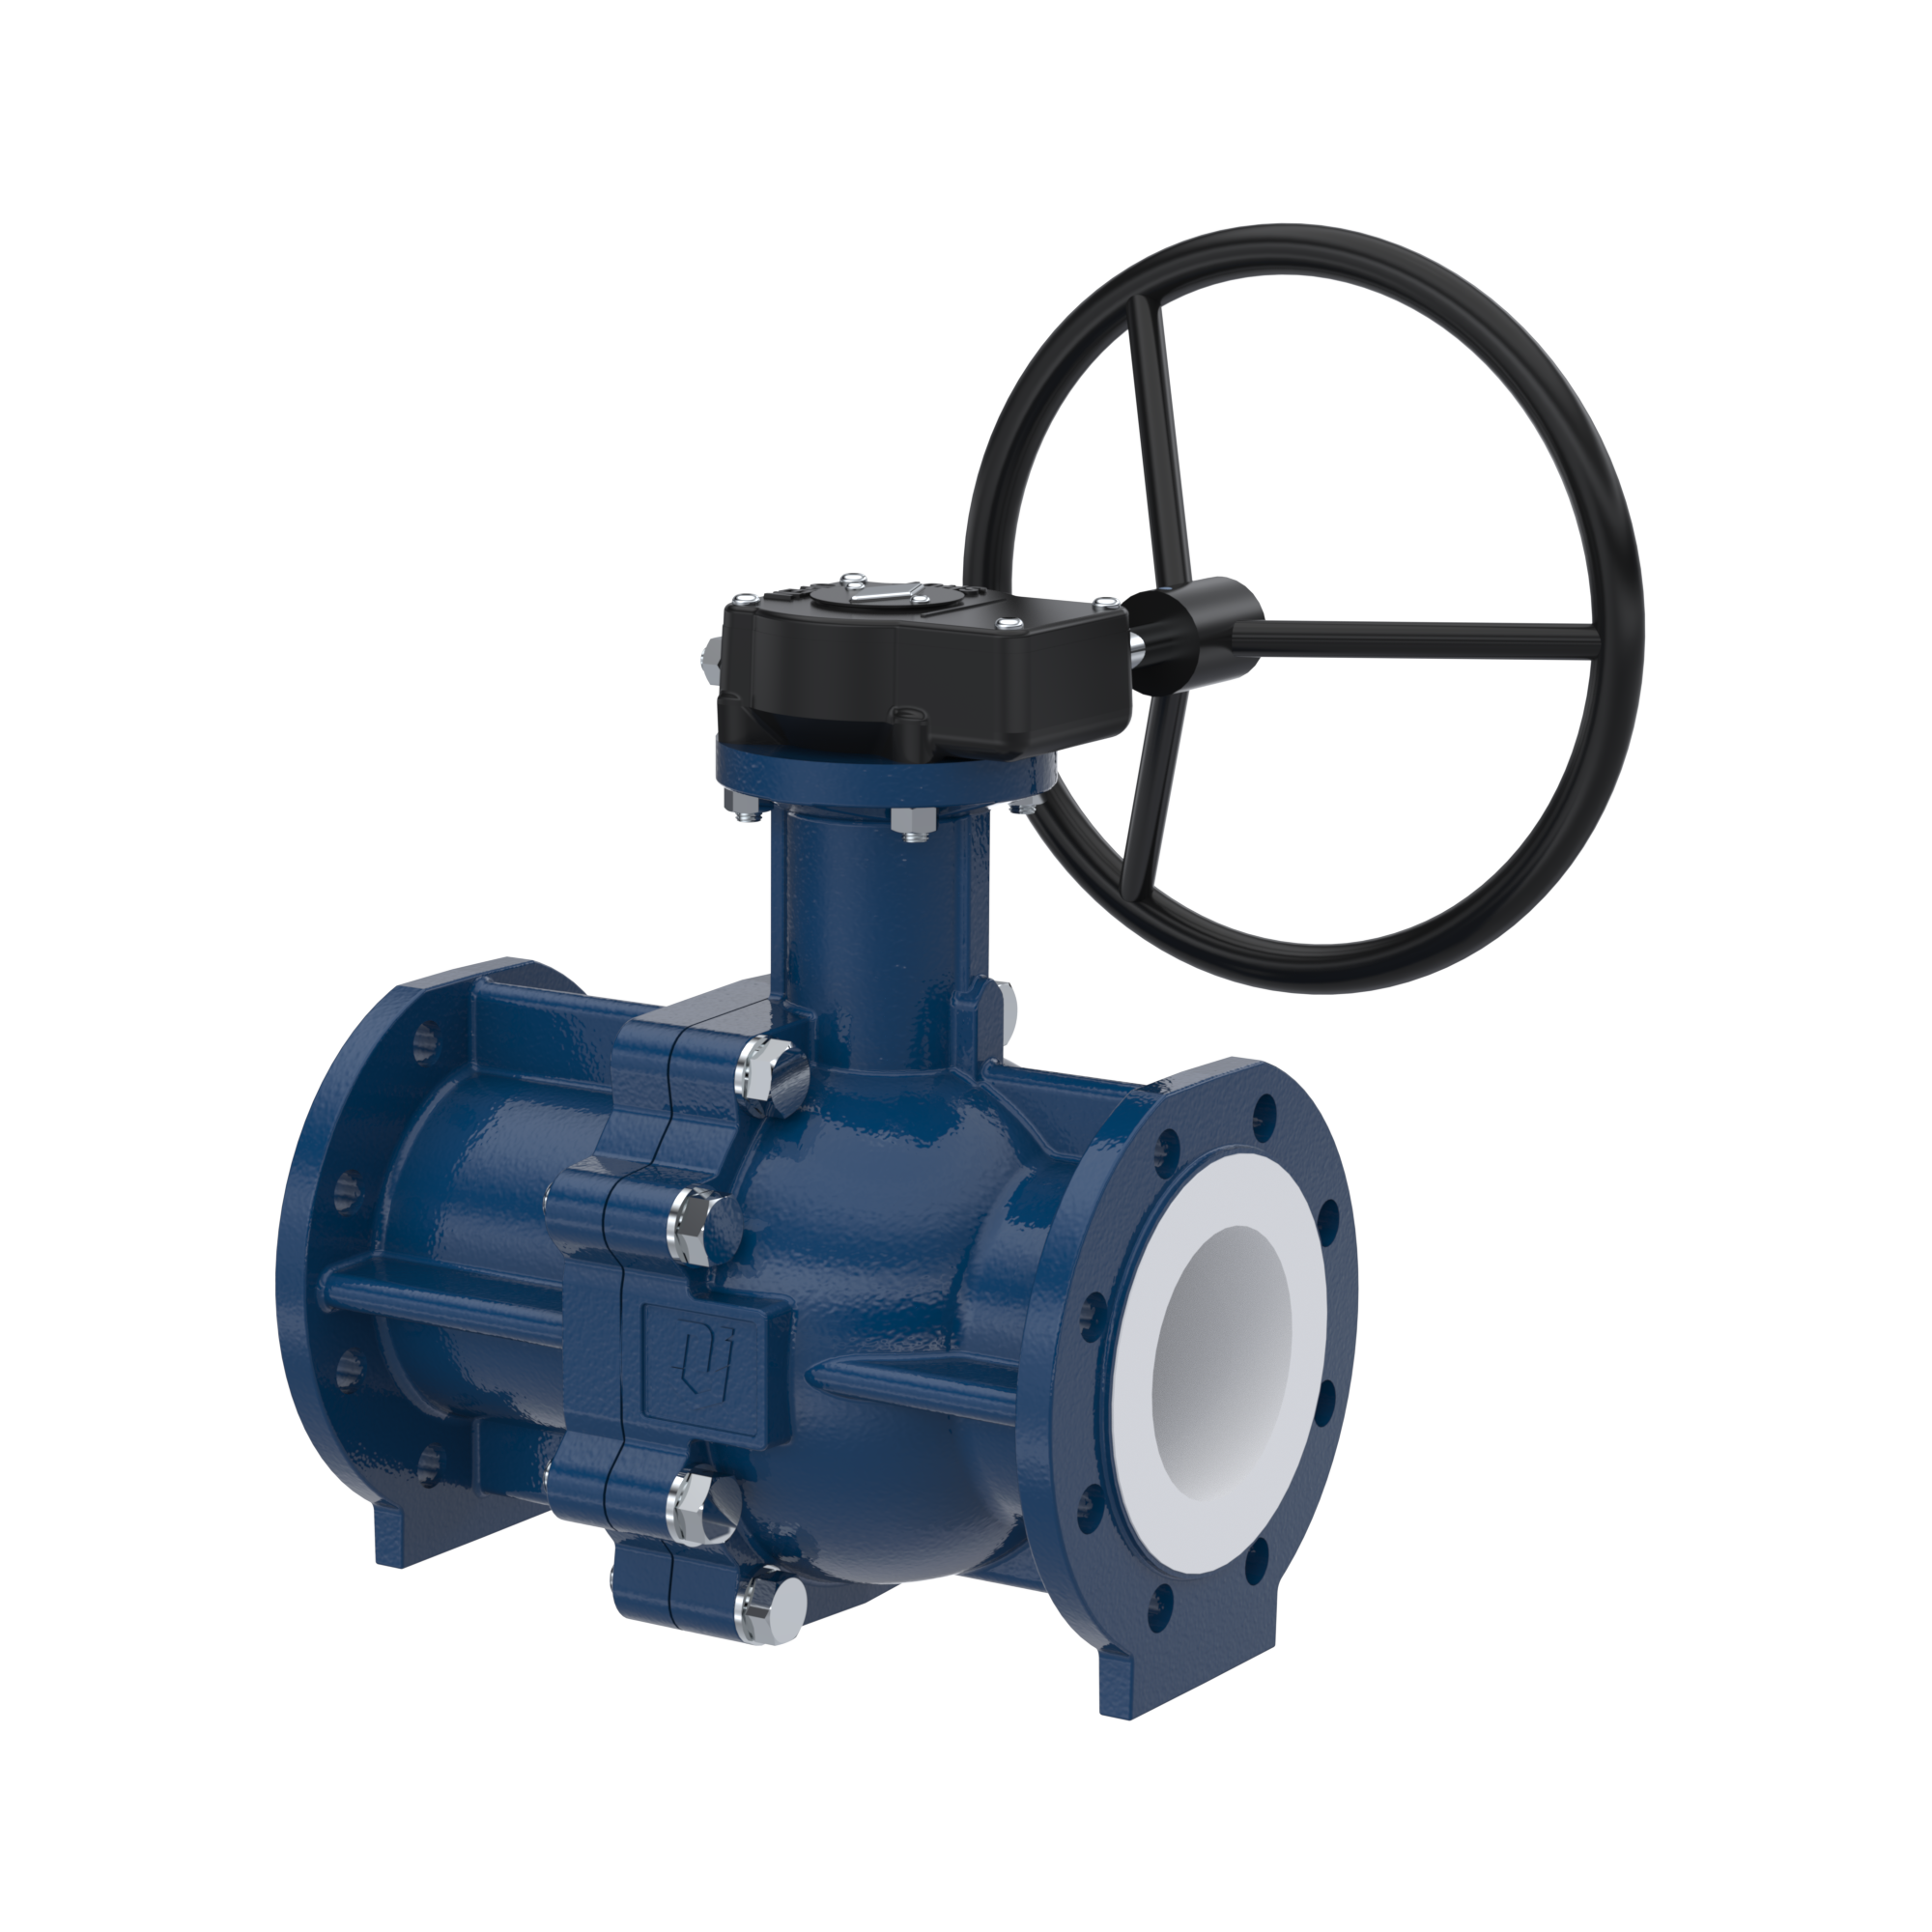 PFA-flange ball valve FK13 DN80 - 3" inch PN10/16 made of spheroidal graphite cast iron with worm gear